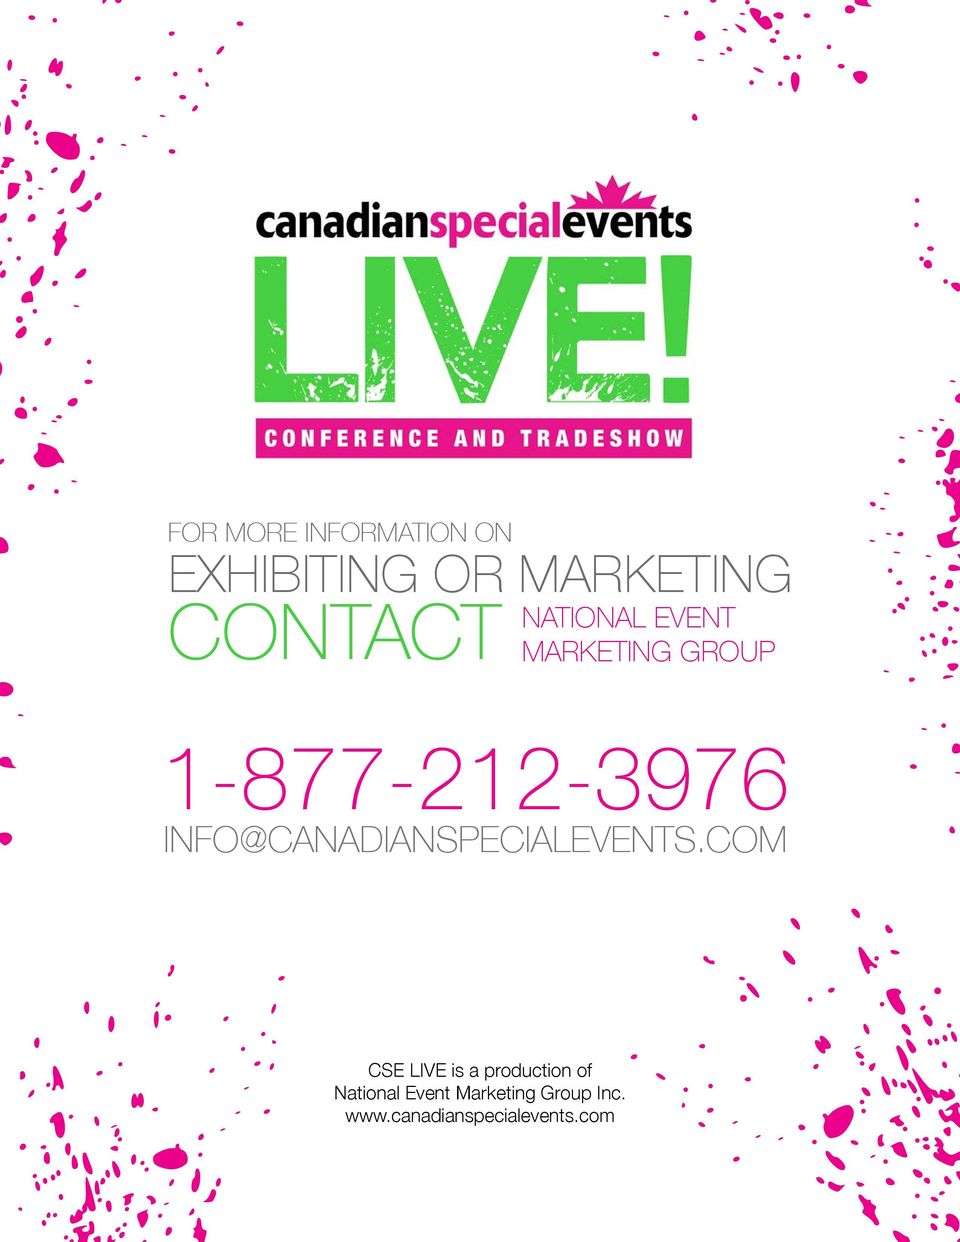 GROUP INFO@CANADIANSPECIALEVENTS.